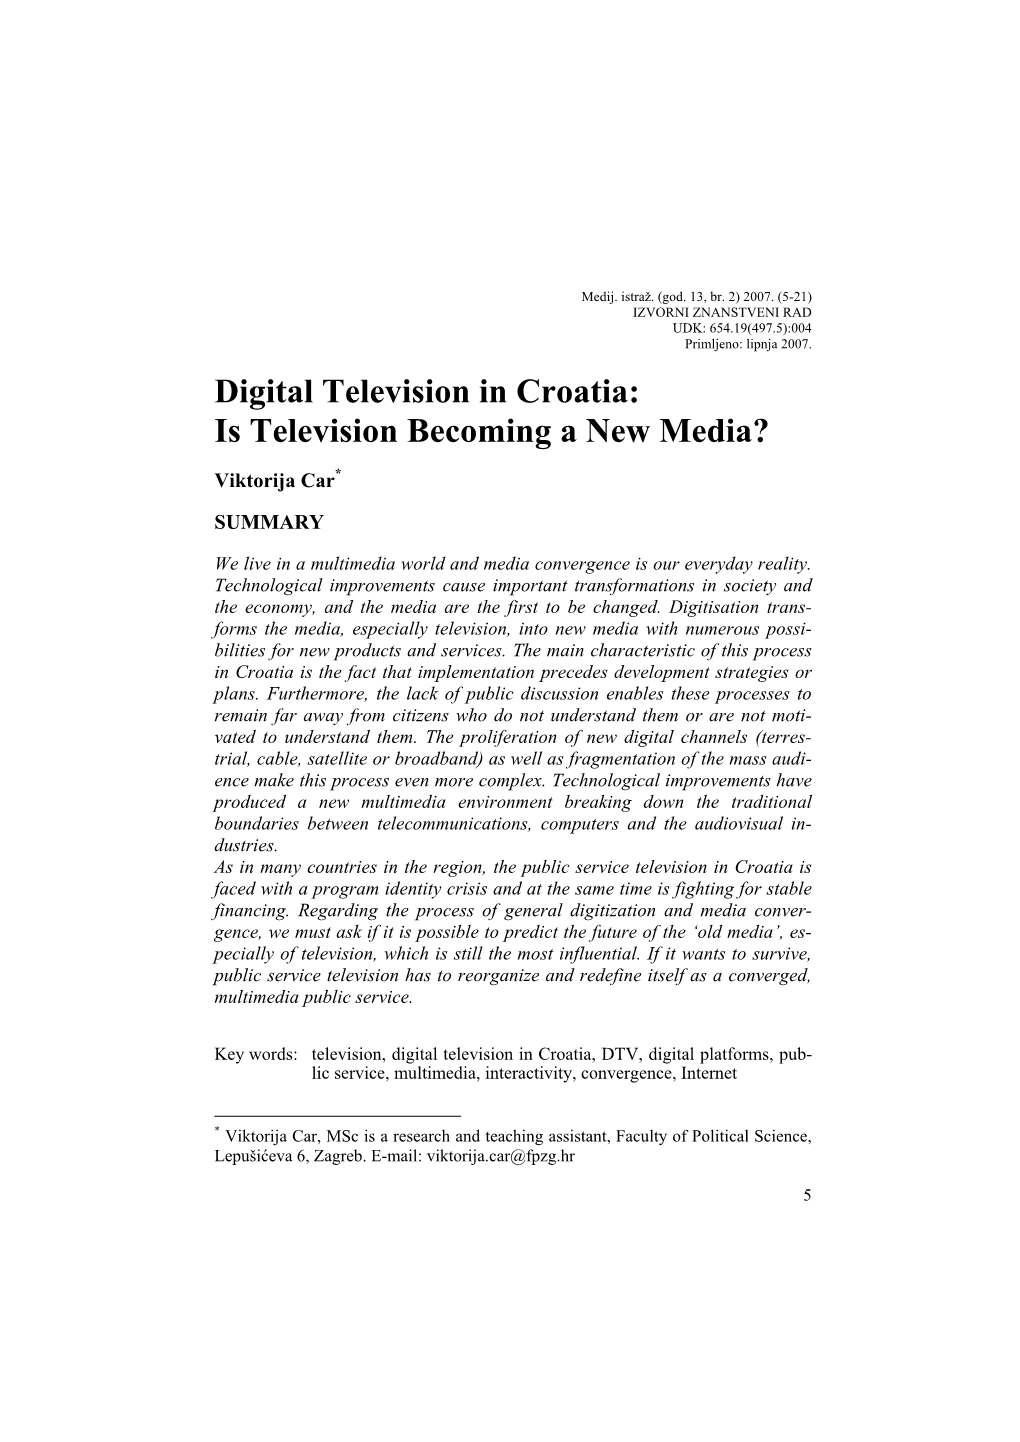 Digital Television in Croatia: Is Television Becoming a New Media?